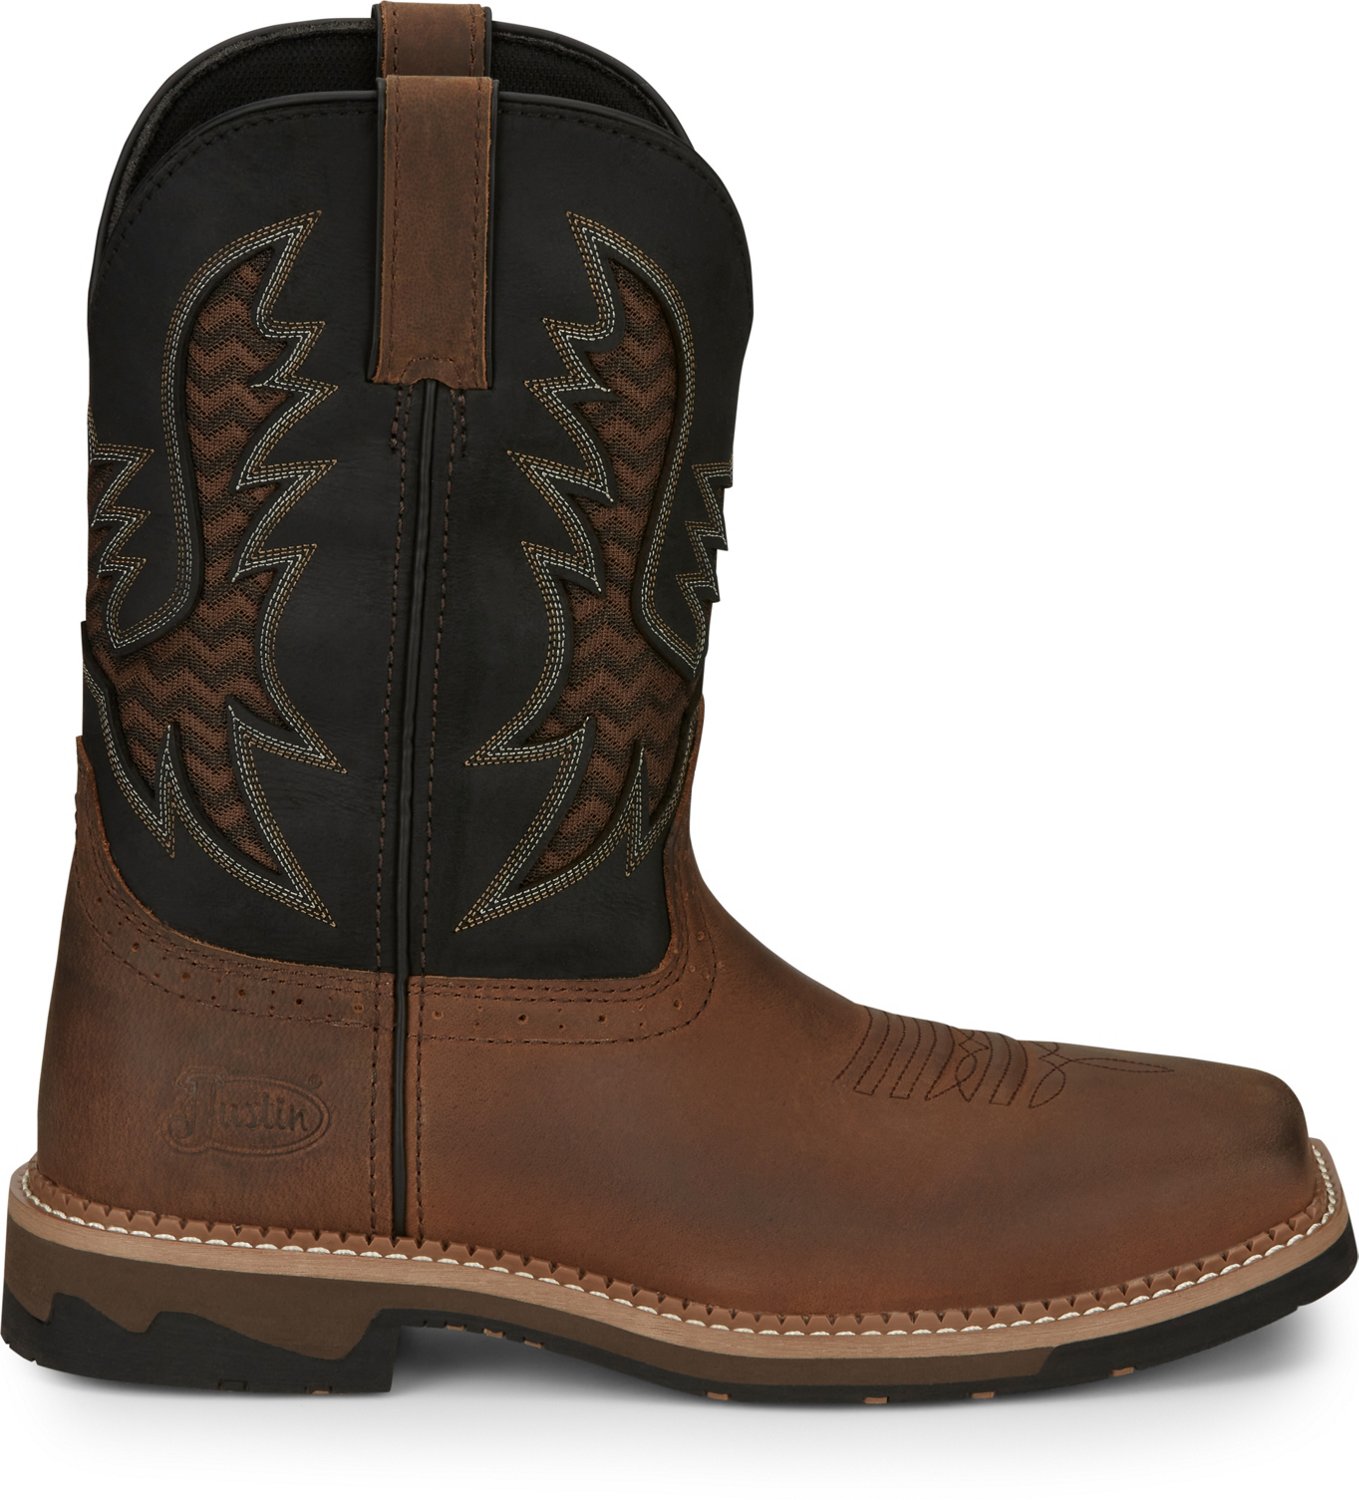 Where to Buy Justin Boots Tampa Fl?